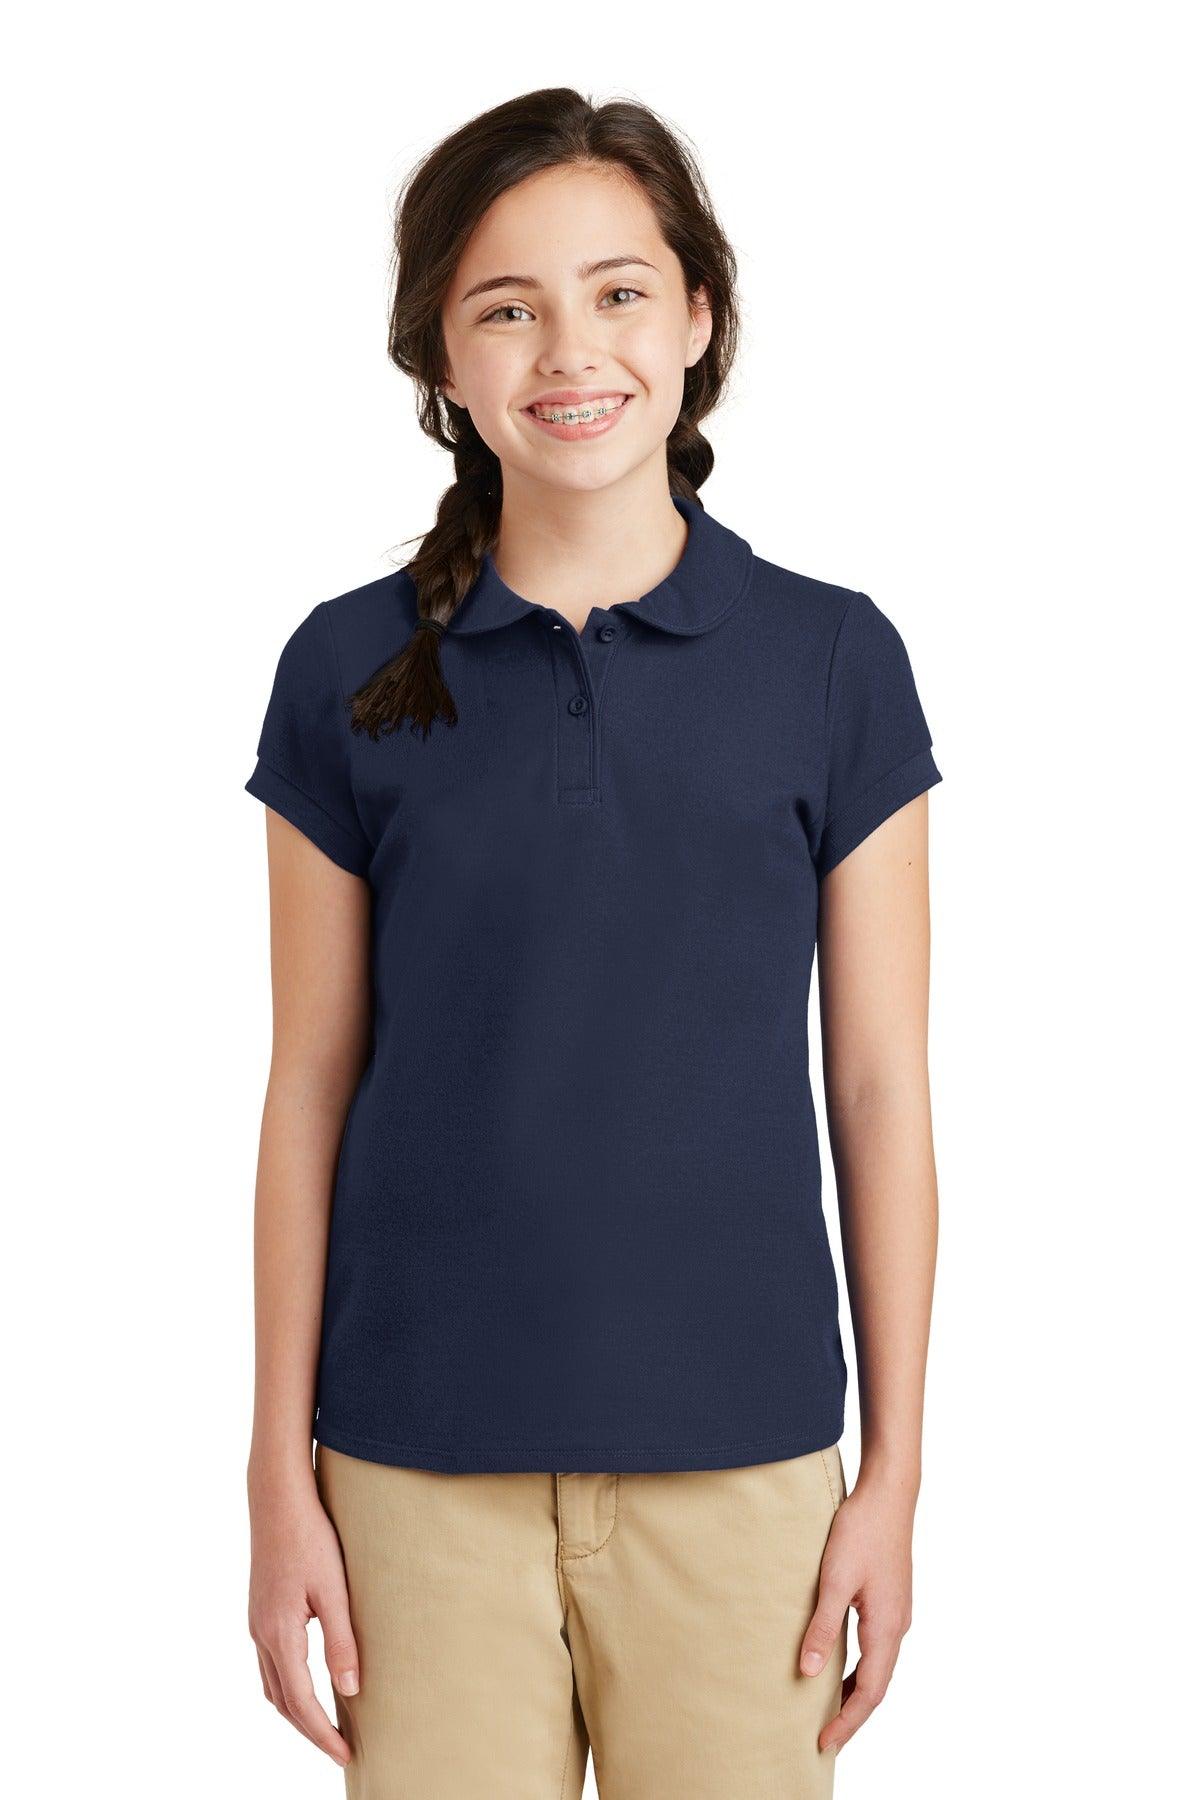 Port Authority Girls Silk Touch Peter Pan Collar Polo. YG503 - Dresses Max